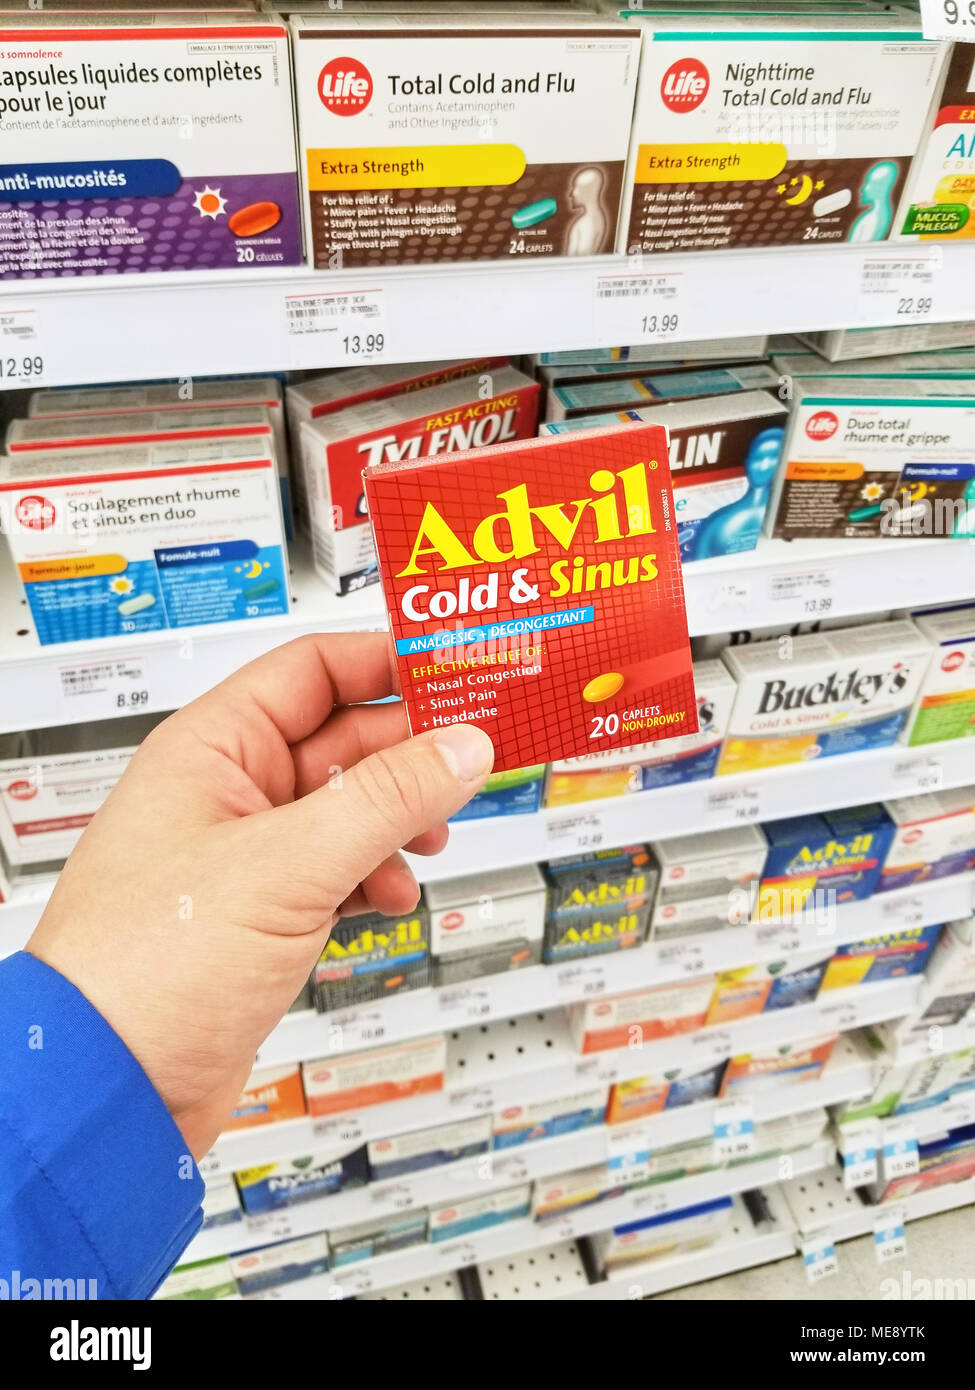 MONTREAL, CANADA - MARCH 10, 2018 : A hand holding Advil pack. Advil ibuprofen is a nonsteroidal anti-inflammatory drug NSAID Stock Photo